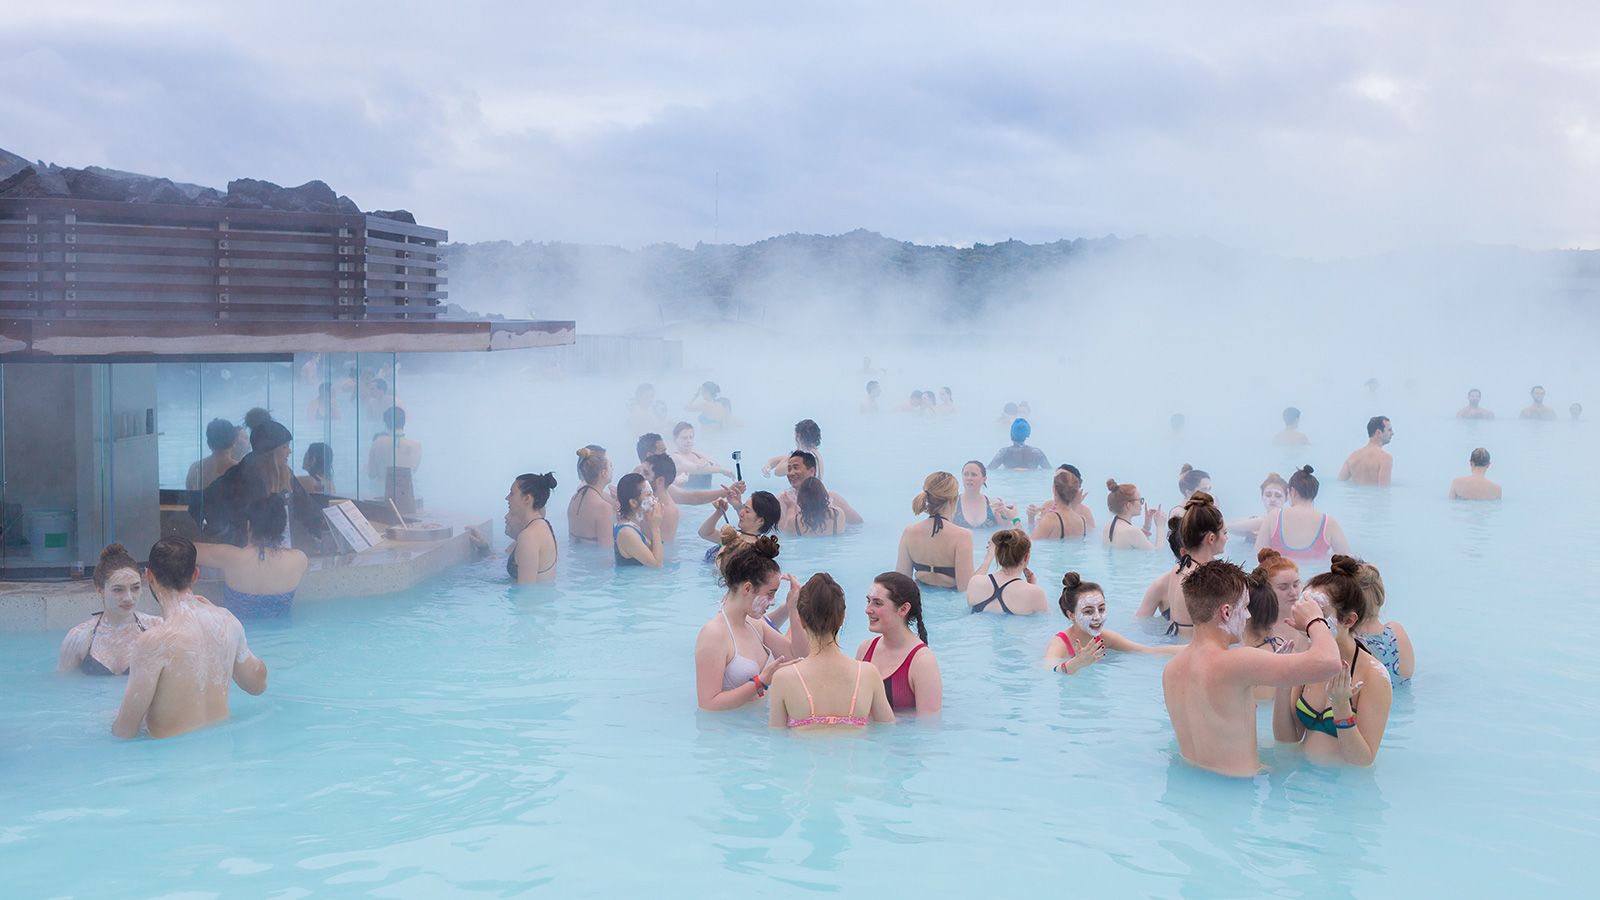 10 Things You Should Know Before Visiting Iceland